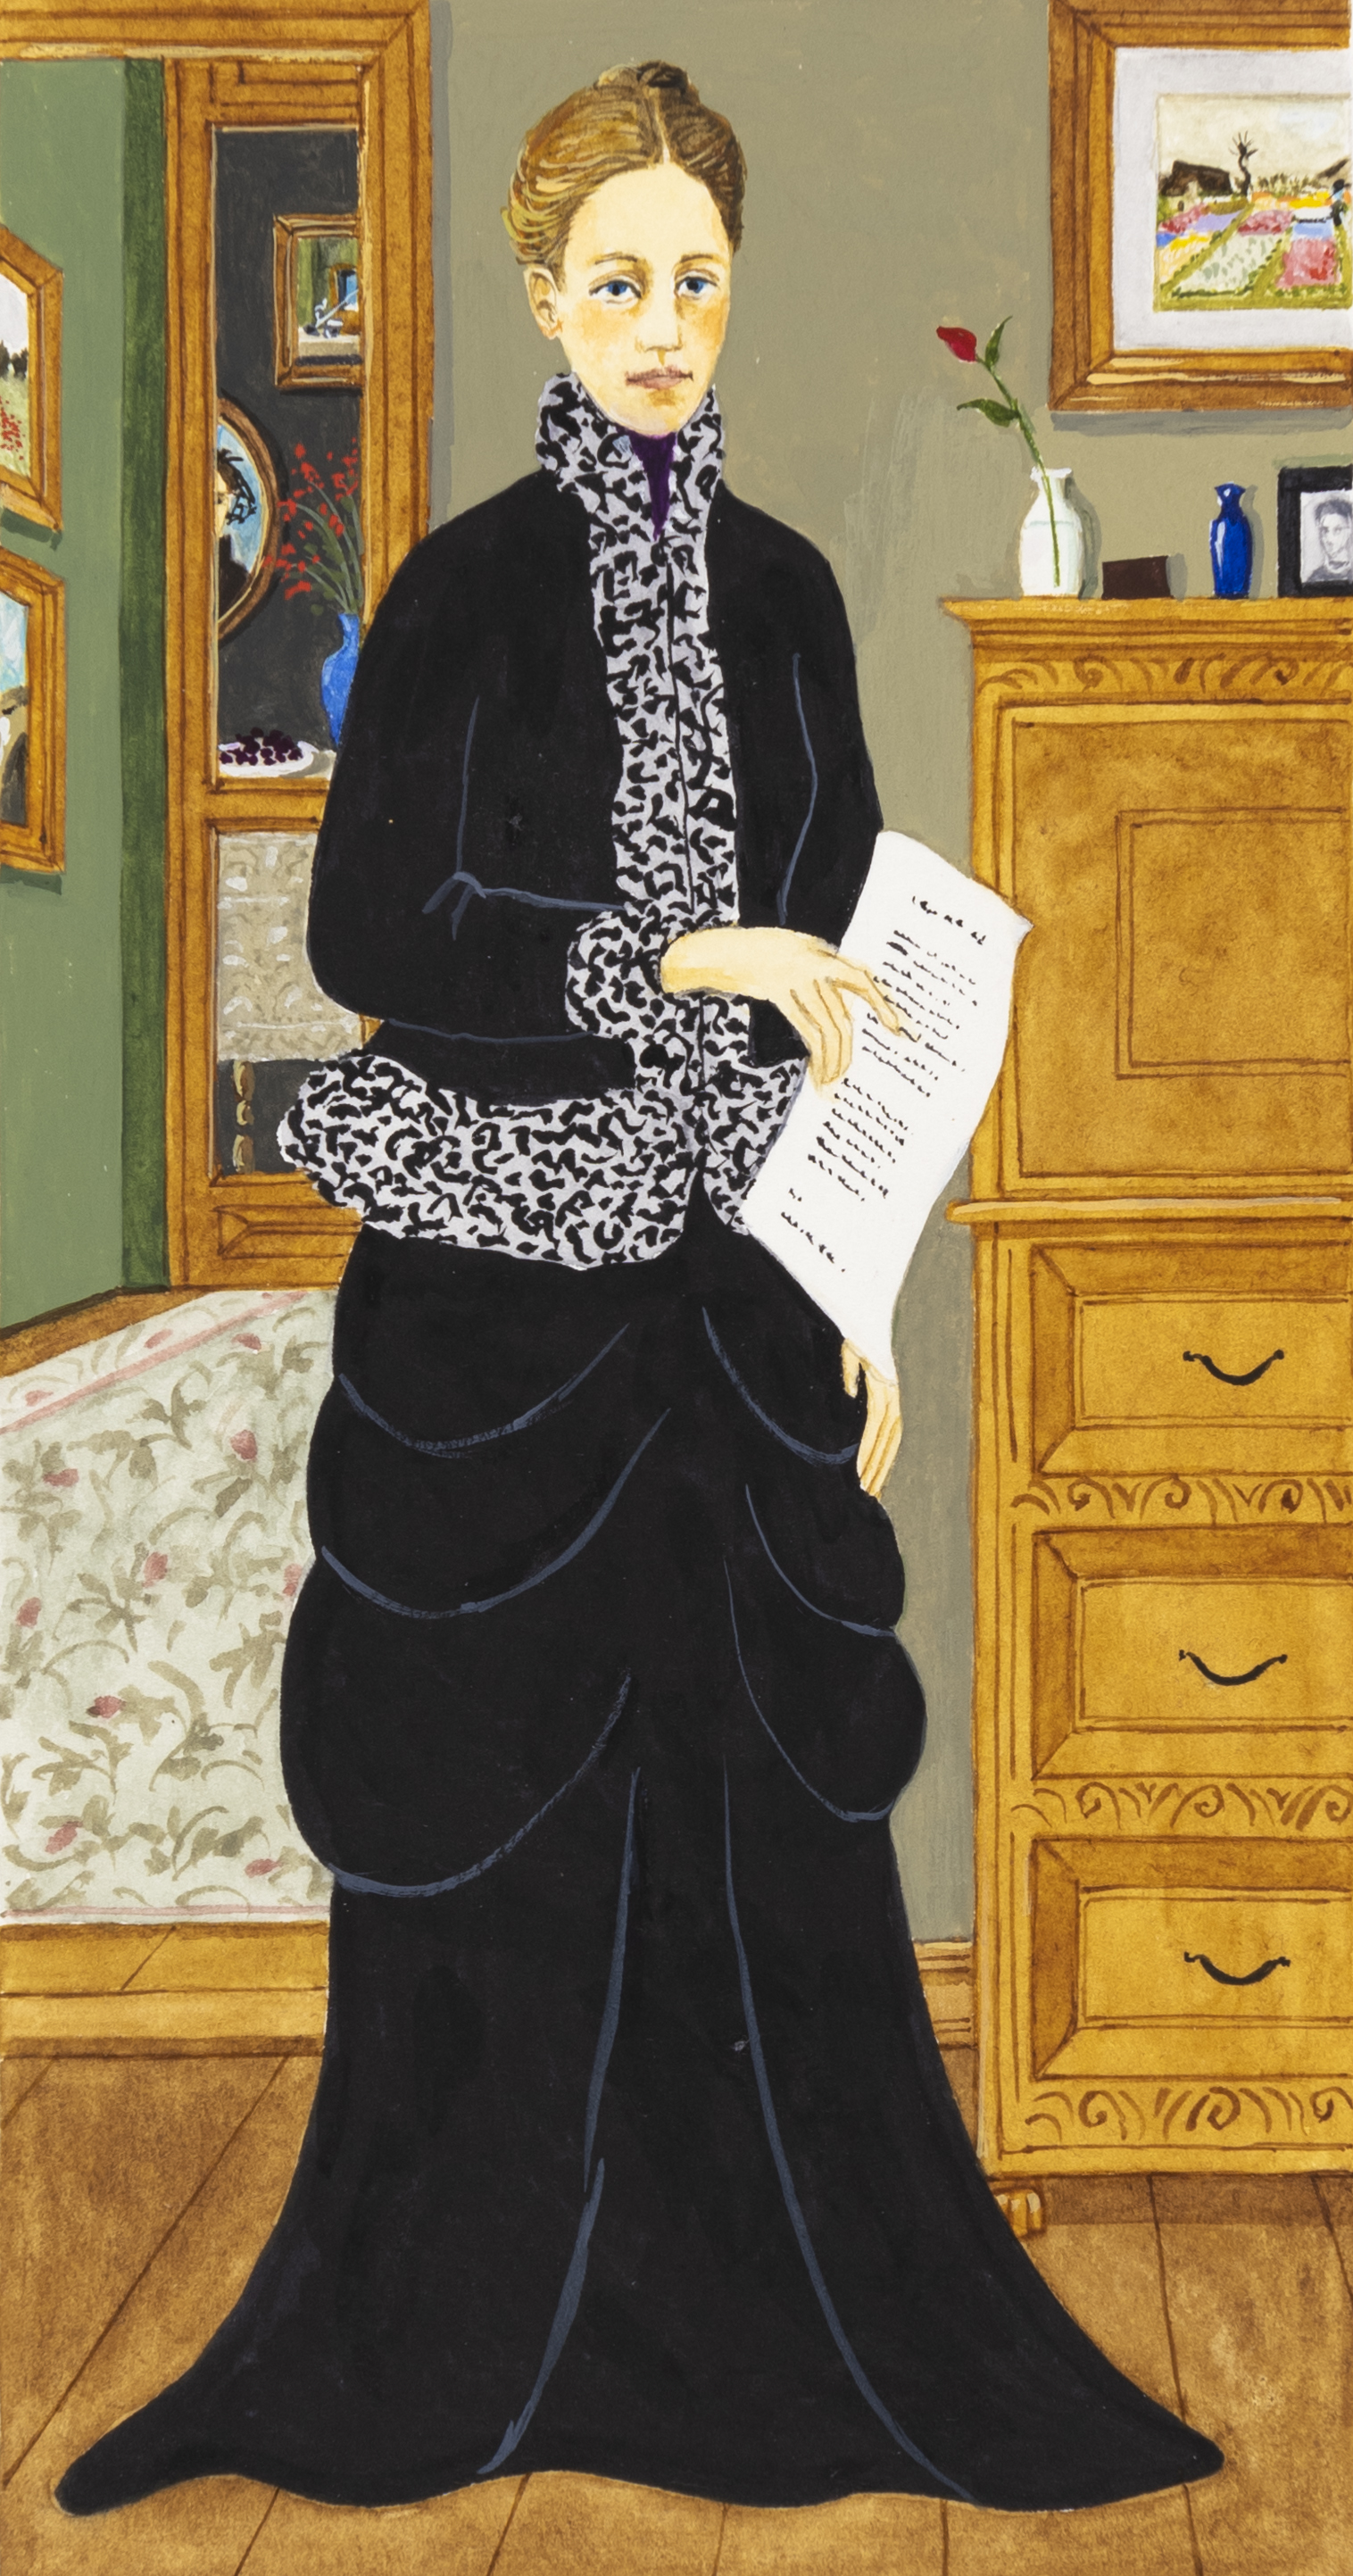 Image of woman in black dress holding letter. 